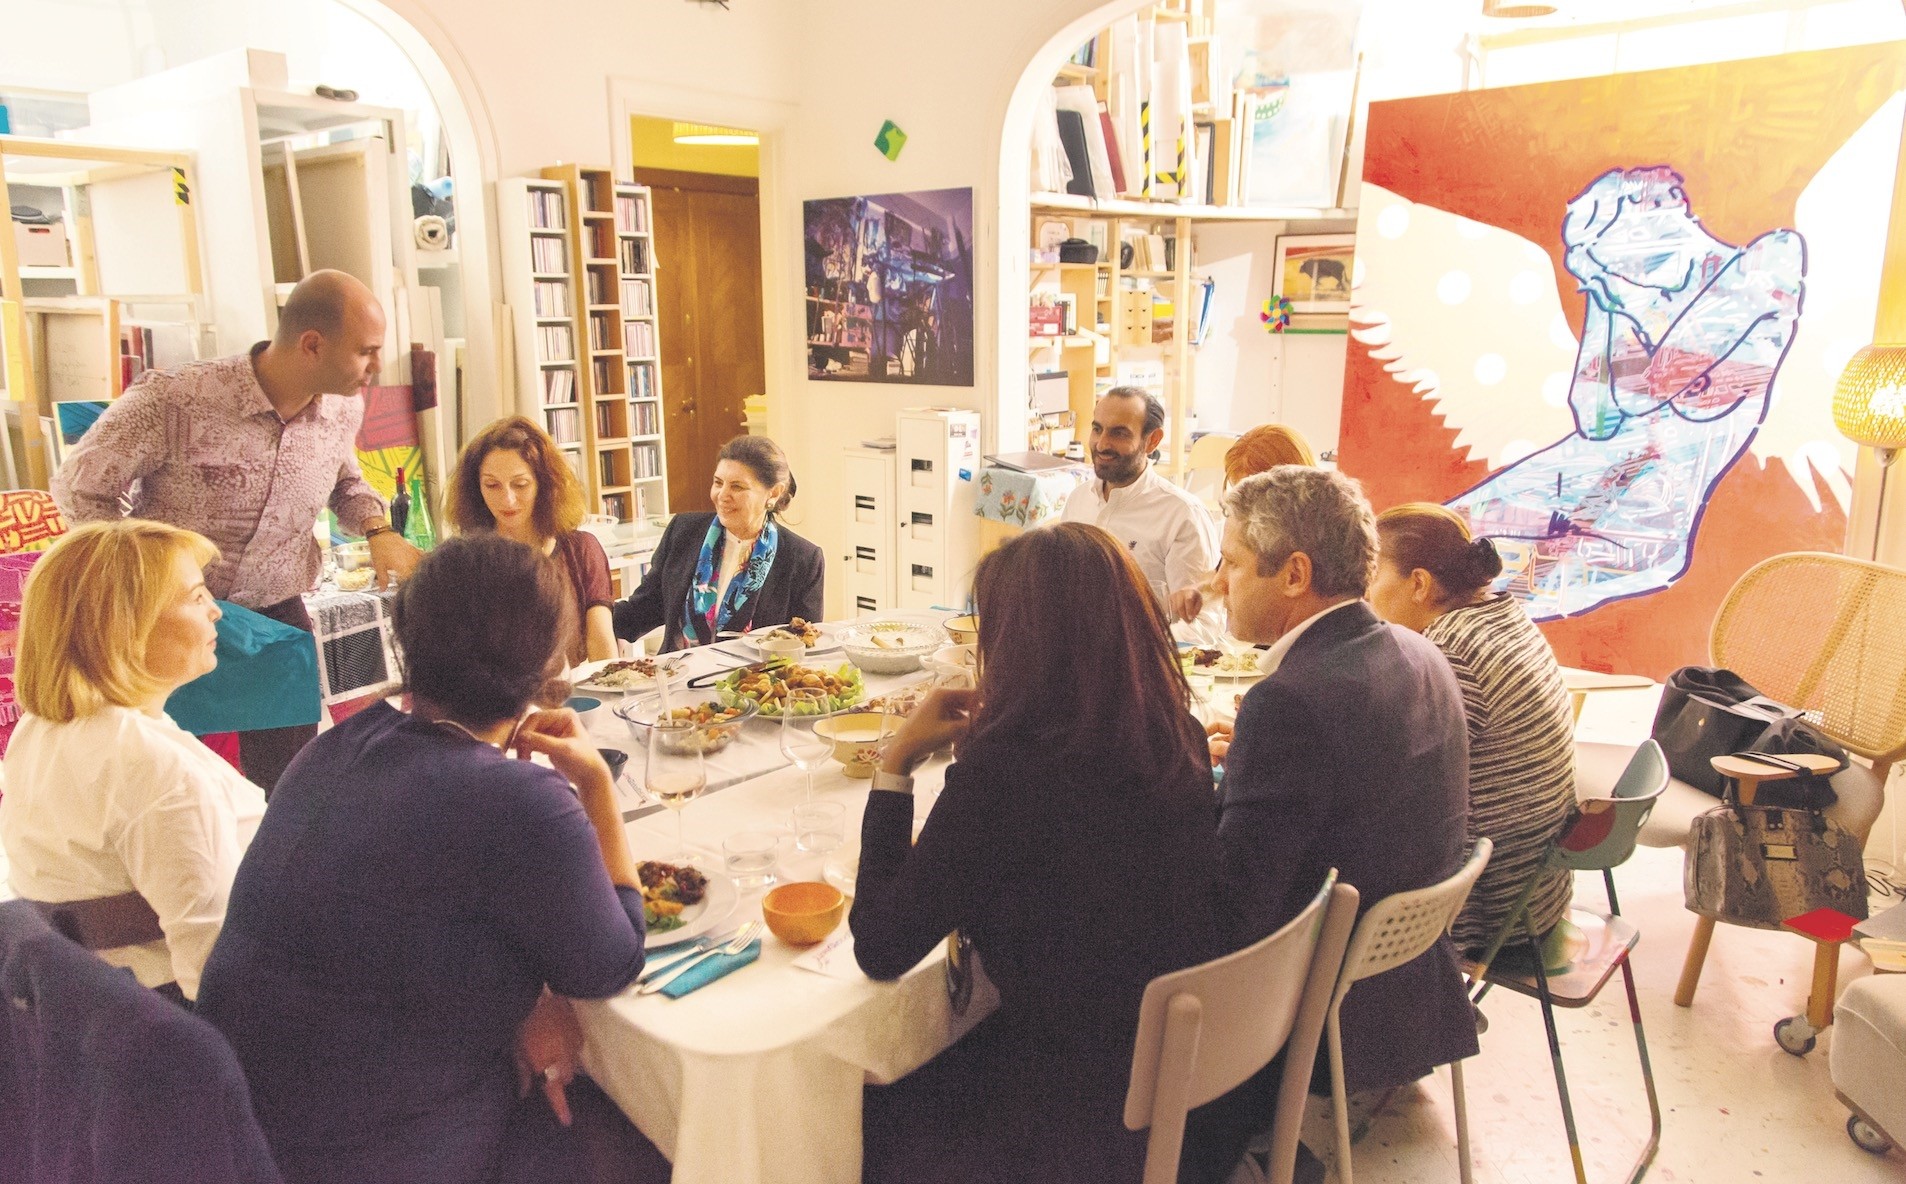 A dinner party hosted in Turkey. YeatUp works as a platform for people who want to create a special menu and dining experience from their homes and for customers who want to dine out in a unique homey setting.